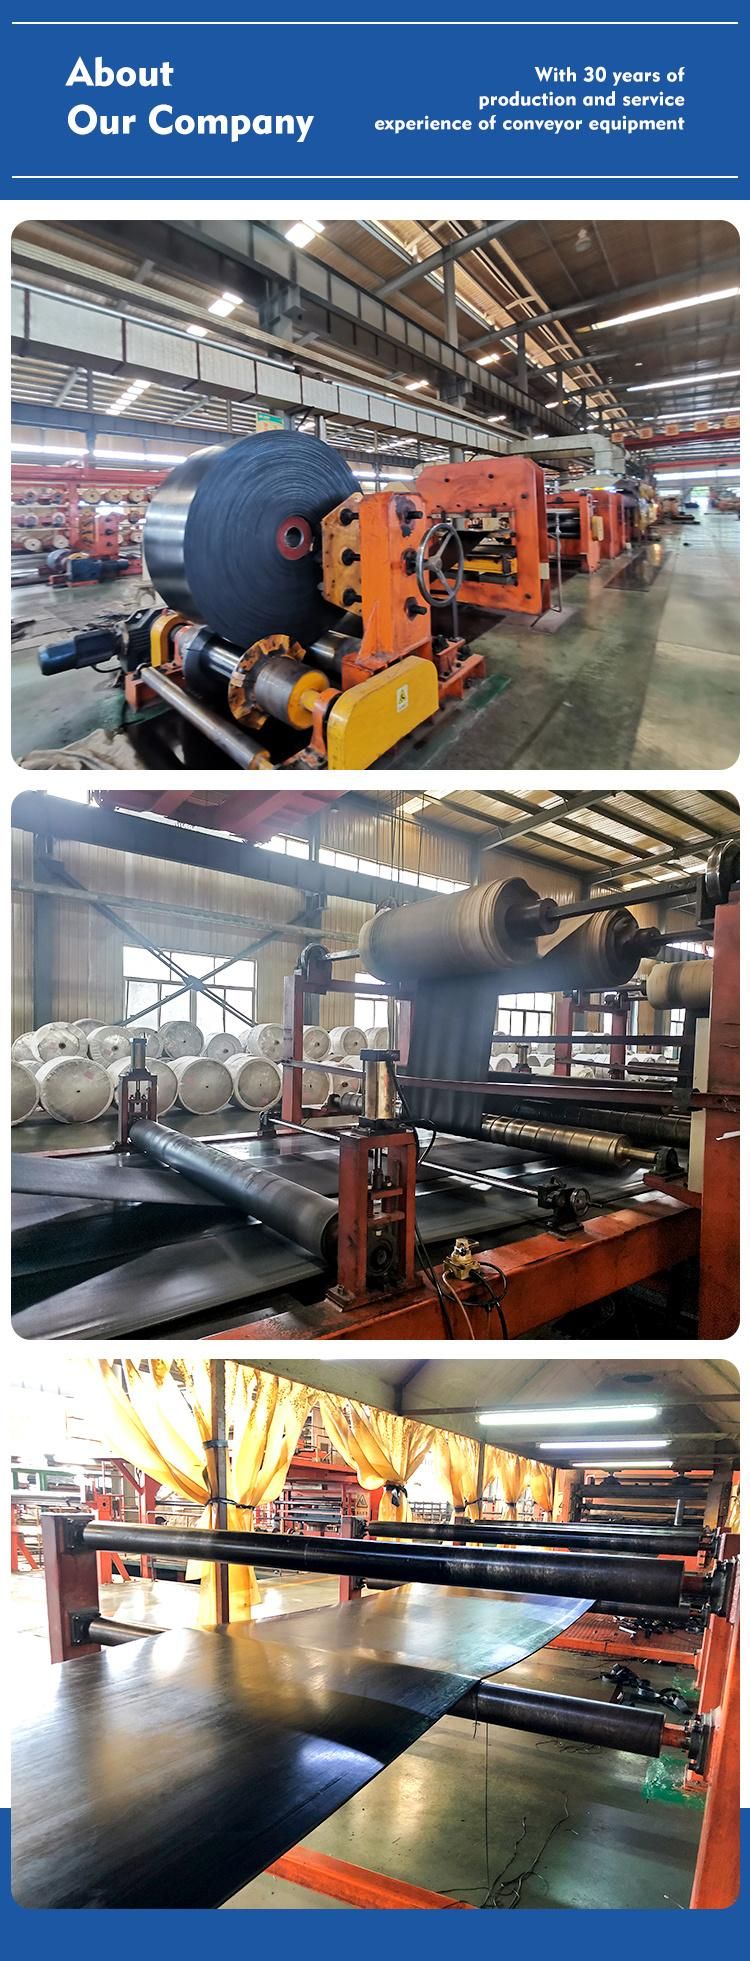 High Durability Quiet Operation Conveyor System Durable Roller